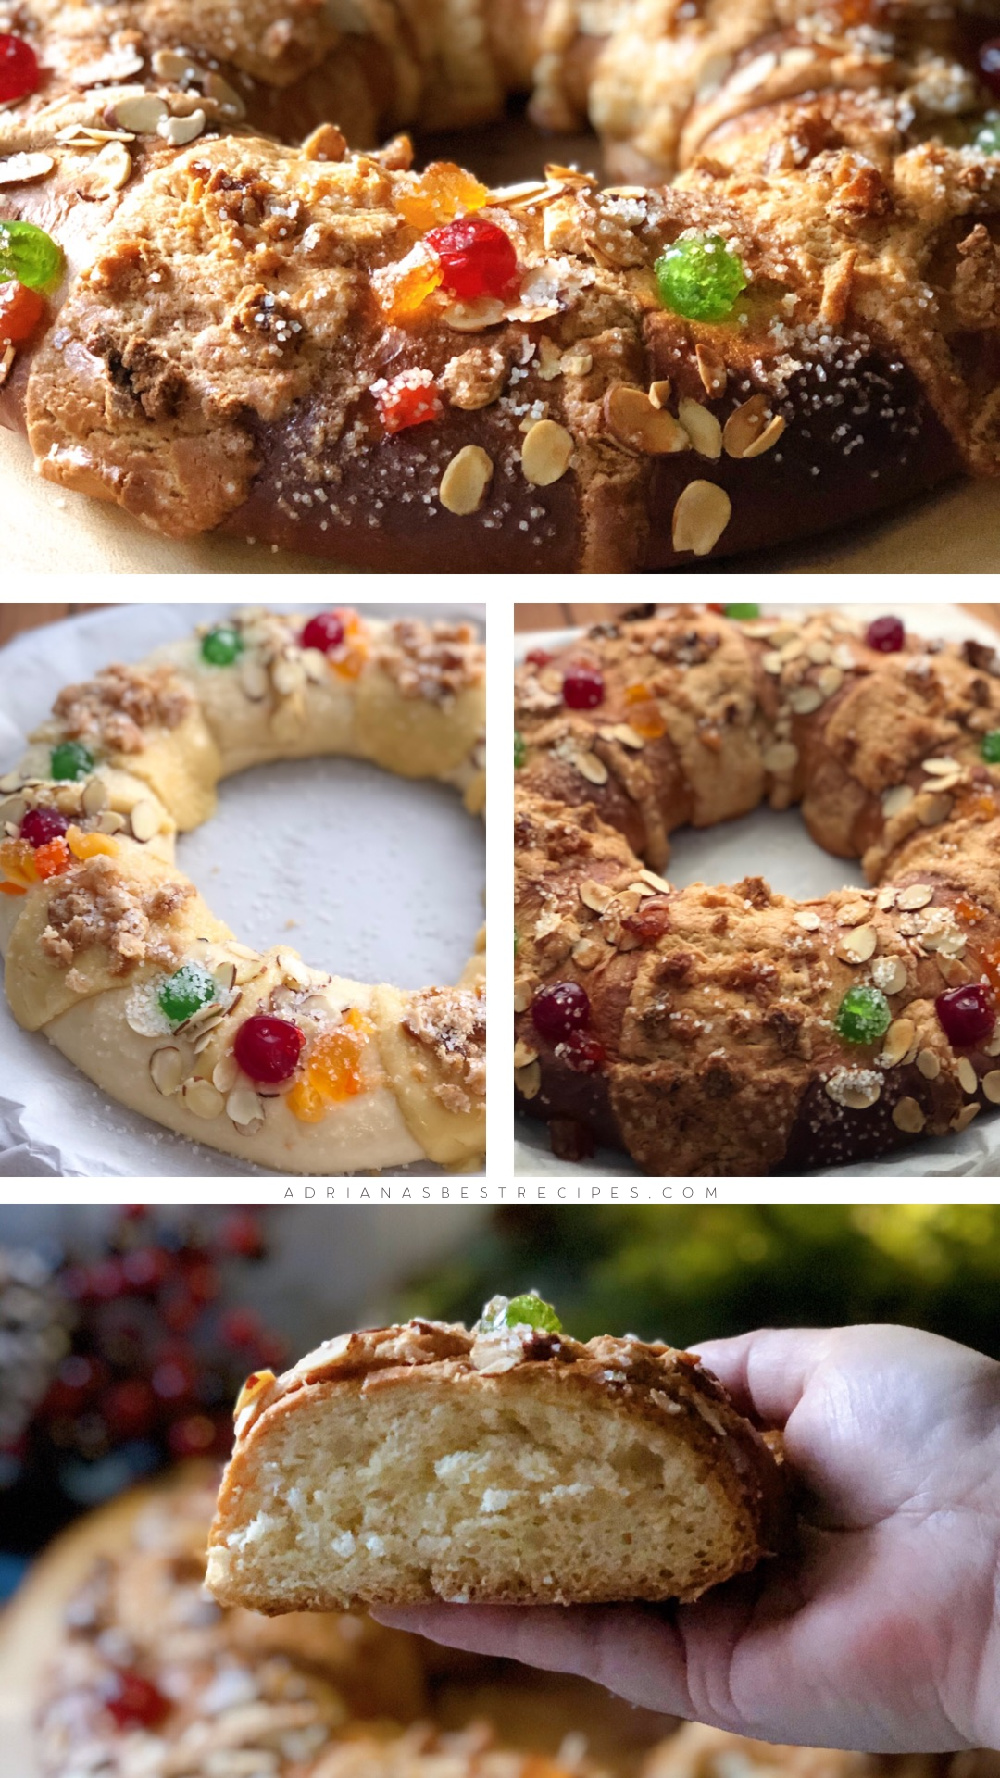 Baking the bread wreath in the oven for thirty minutes. The result is a tender sweet bread with candied fruits on top.